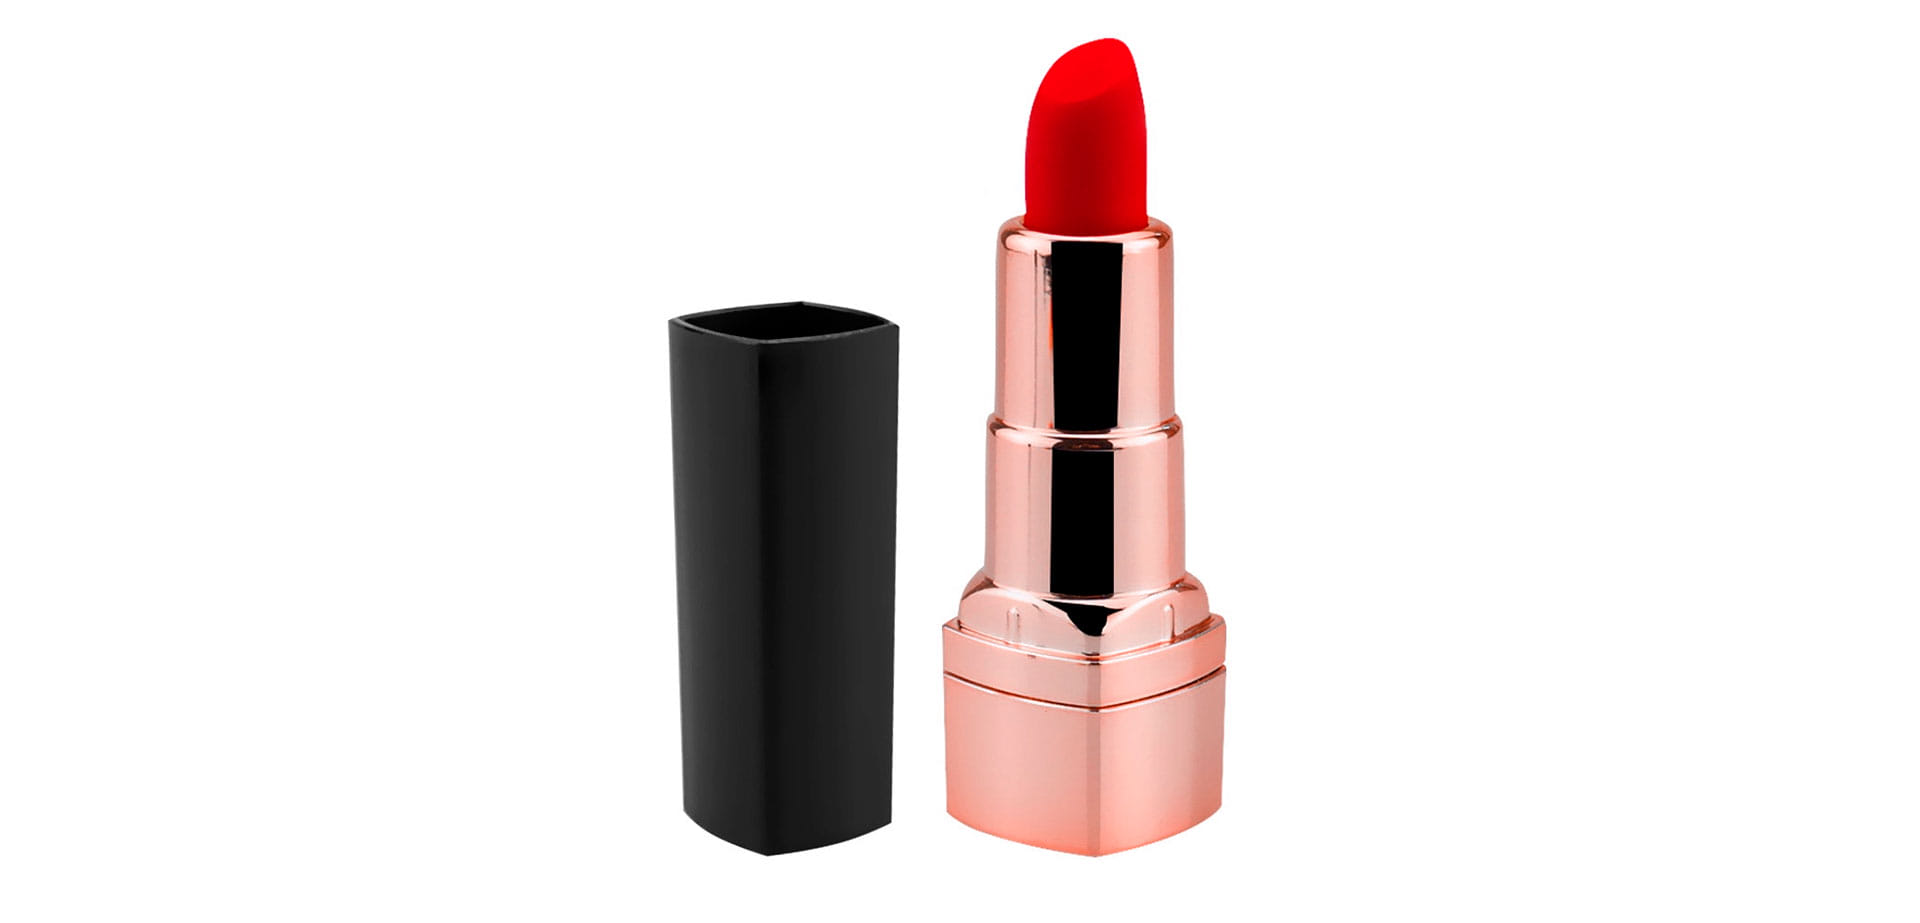 USB Chargeable Pretty Lipstick Vibrator for woman.